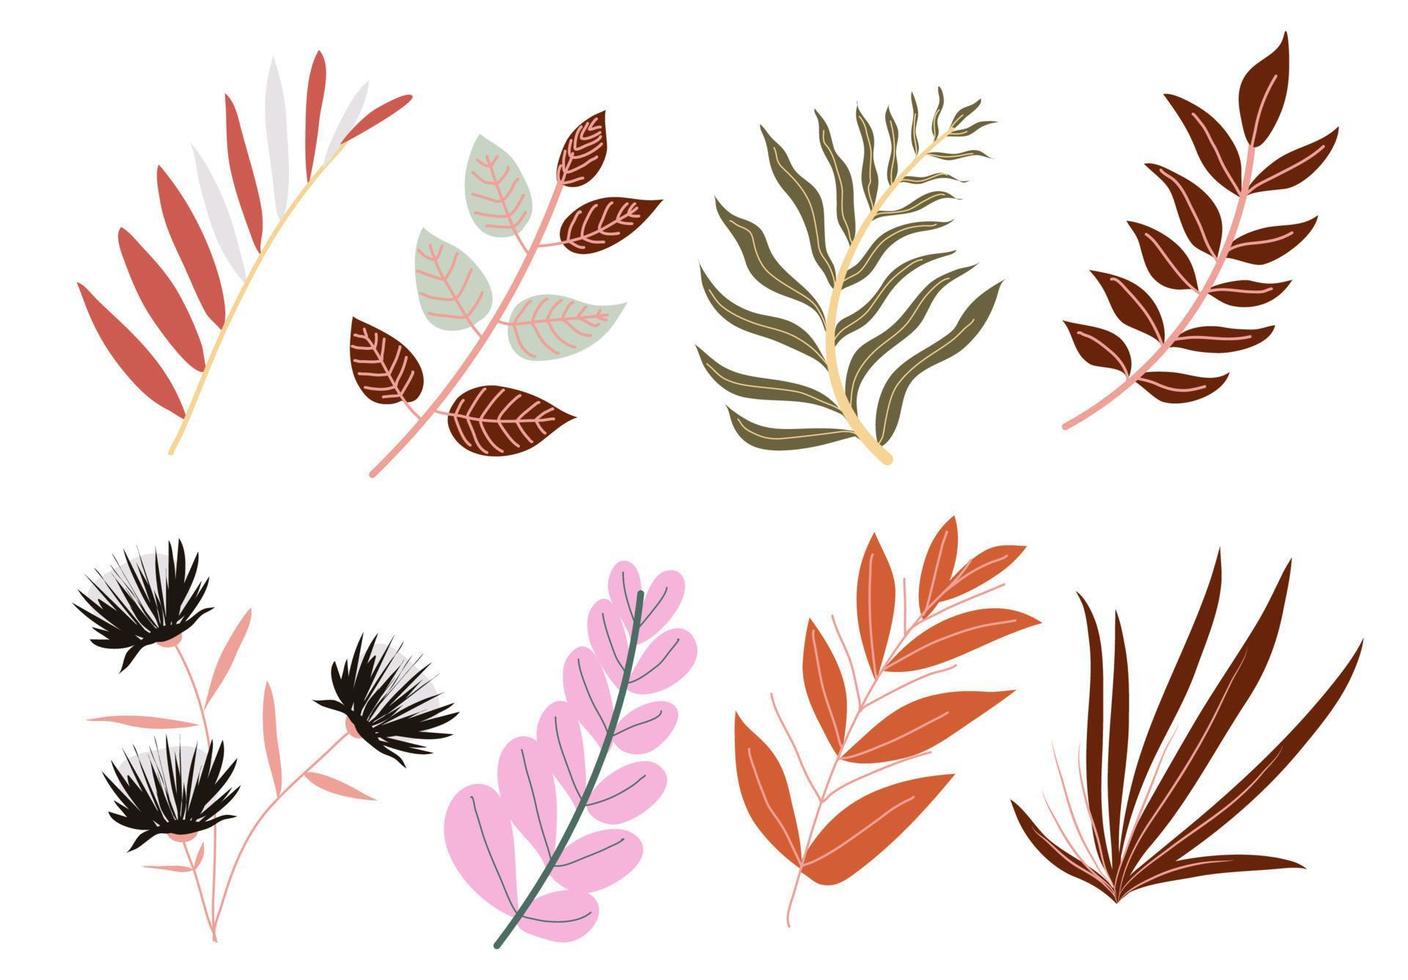 Autumn or spring leaves and branches, twigs set vector